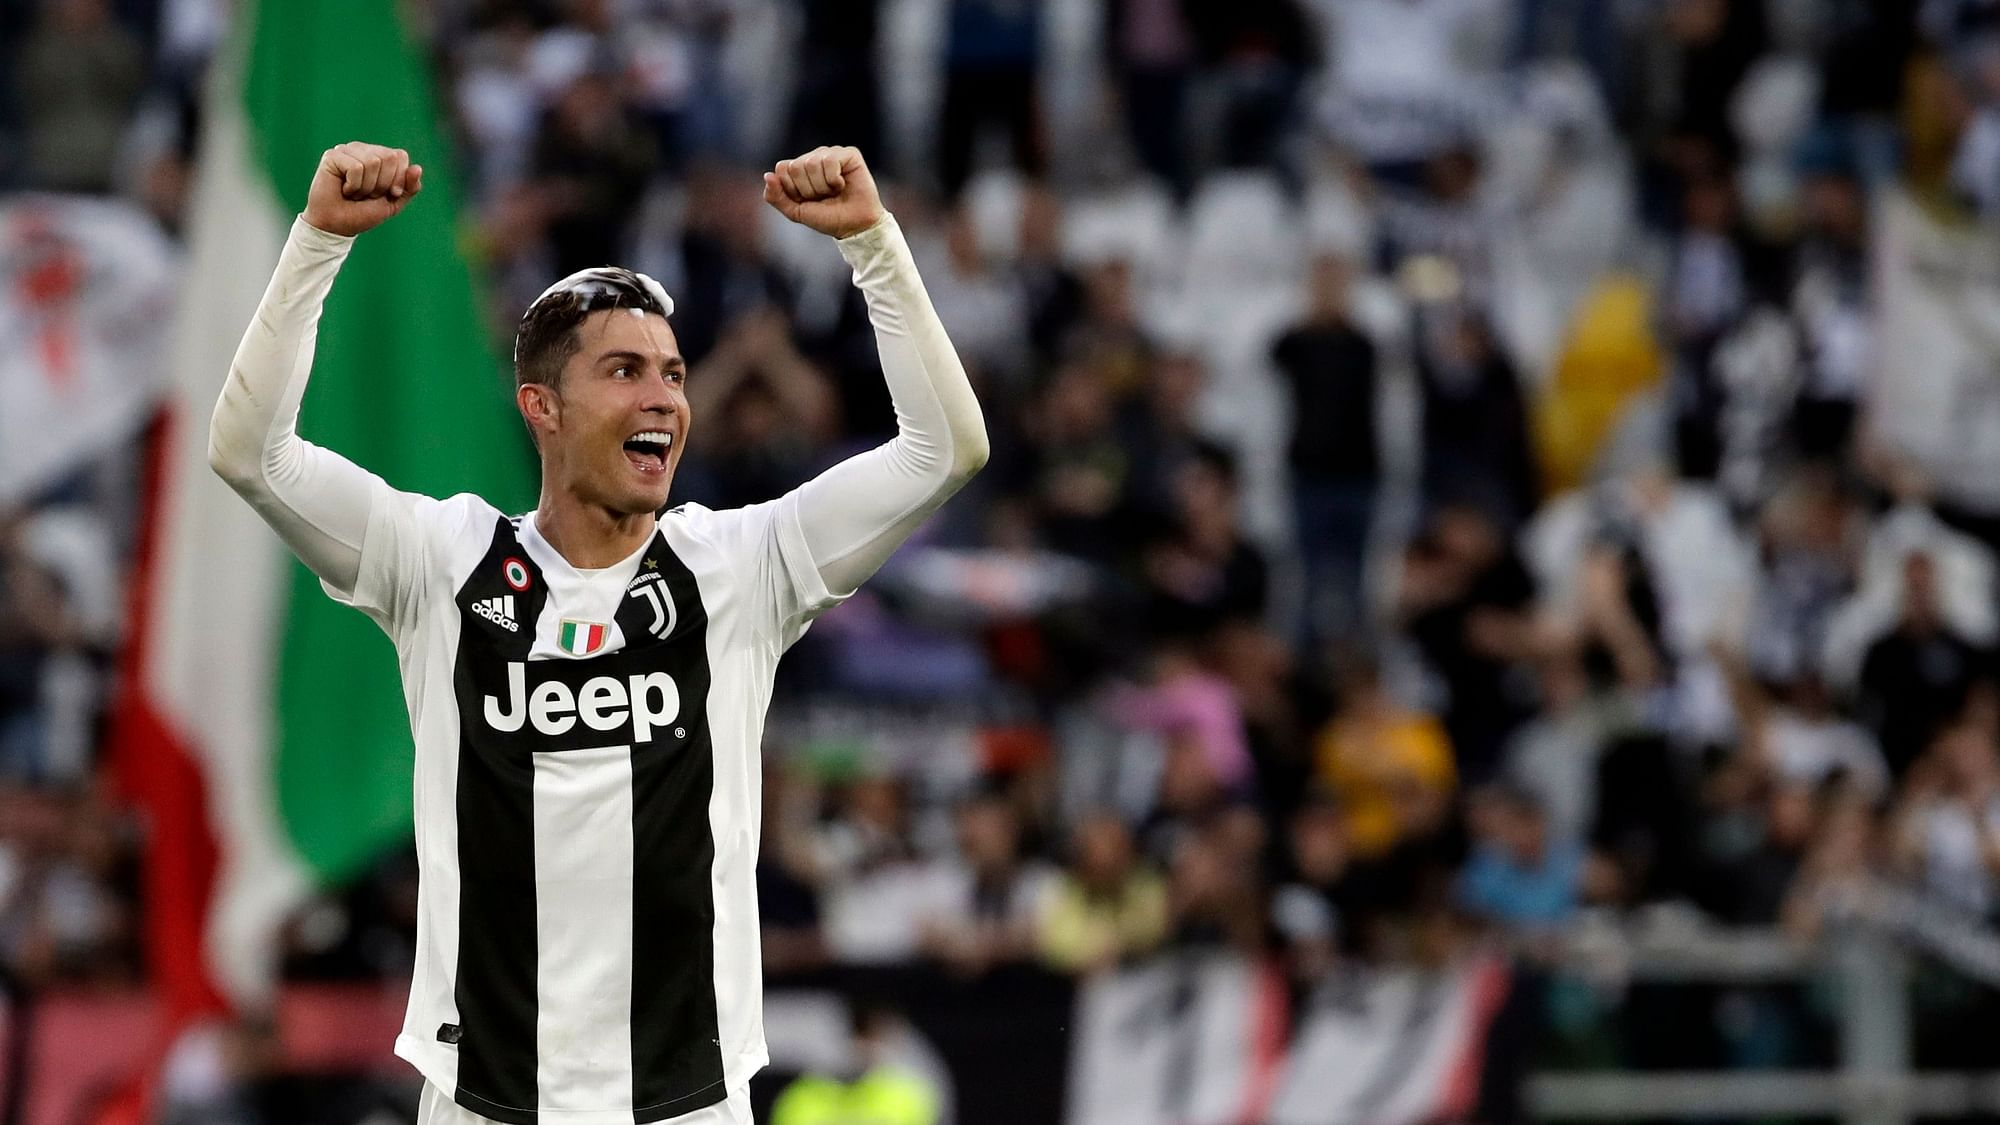 Juventus’ Cristiano Ronaldo celebrates at the end of a Serie A soccer match between Juventus and AC Fiorentina, at the Allianz stadium in Turin, Italy, Saturday, April 20, 2019.